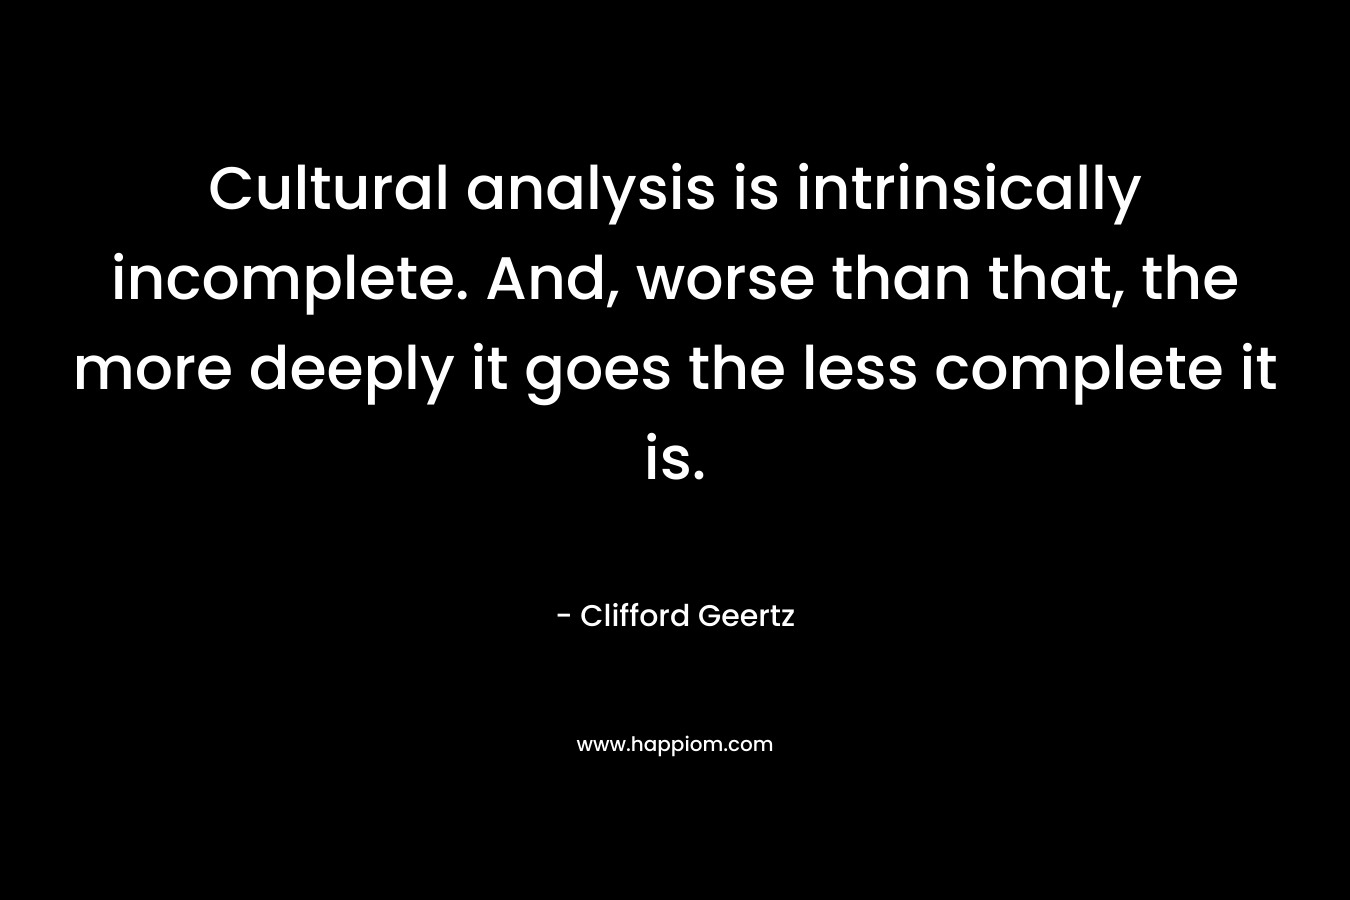 Cultural analysis is intrinsically incomplete. And, worse than that, the more deeply it goes the less complete it is. – Clifford Geertz